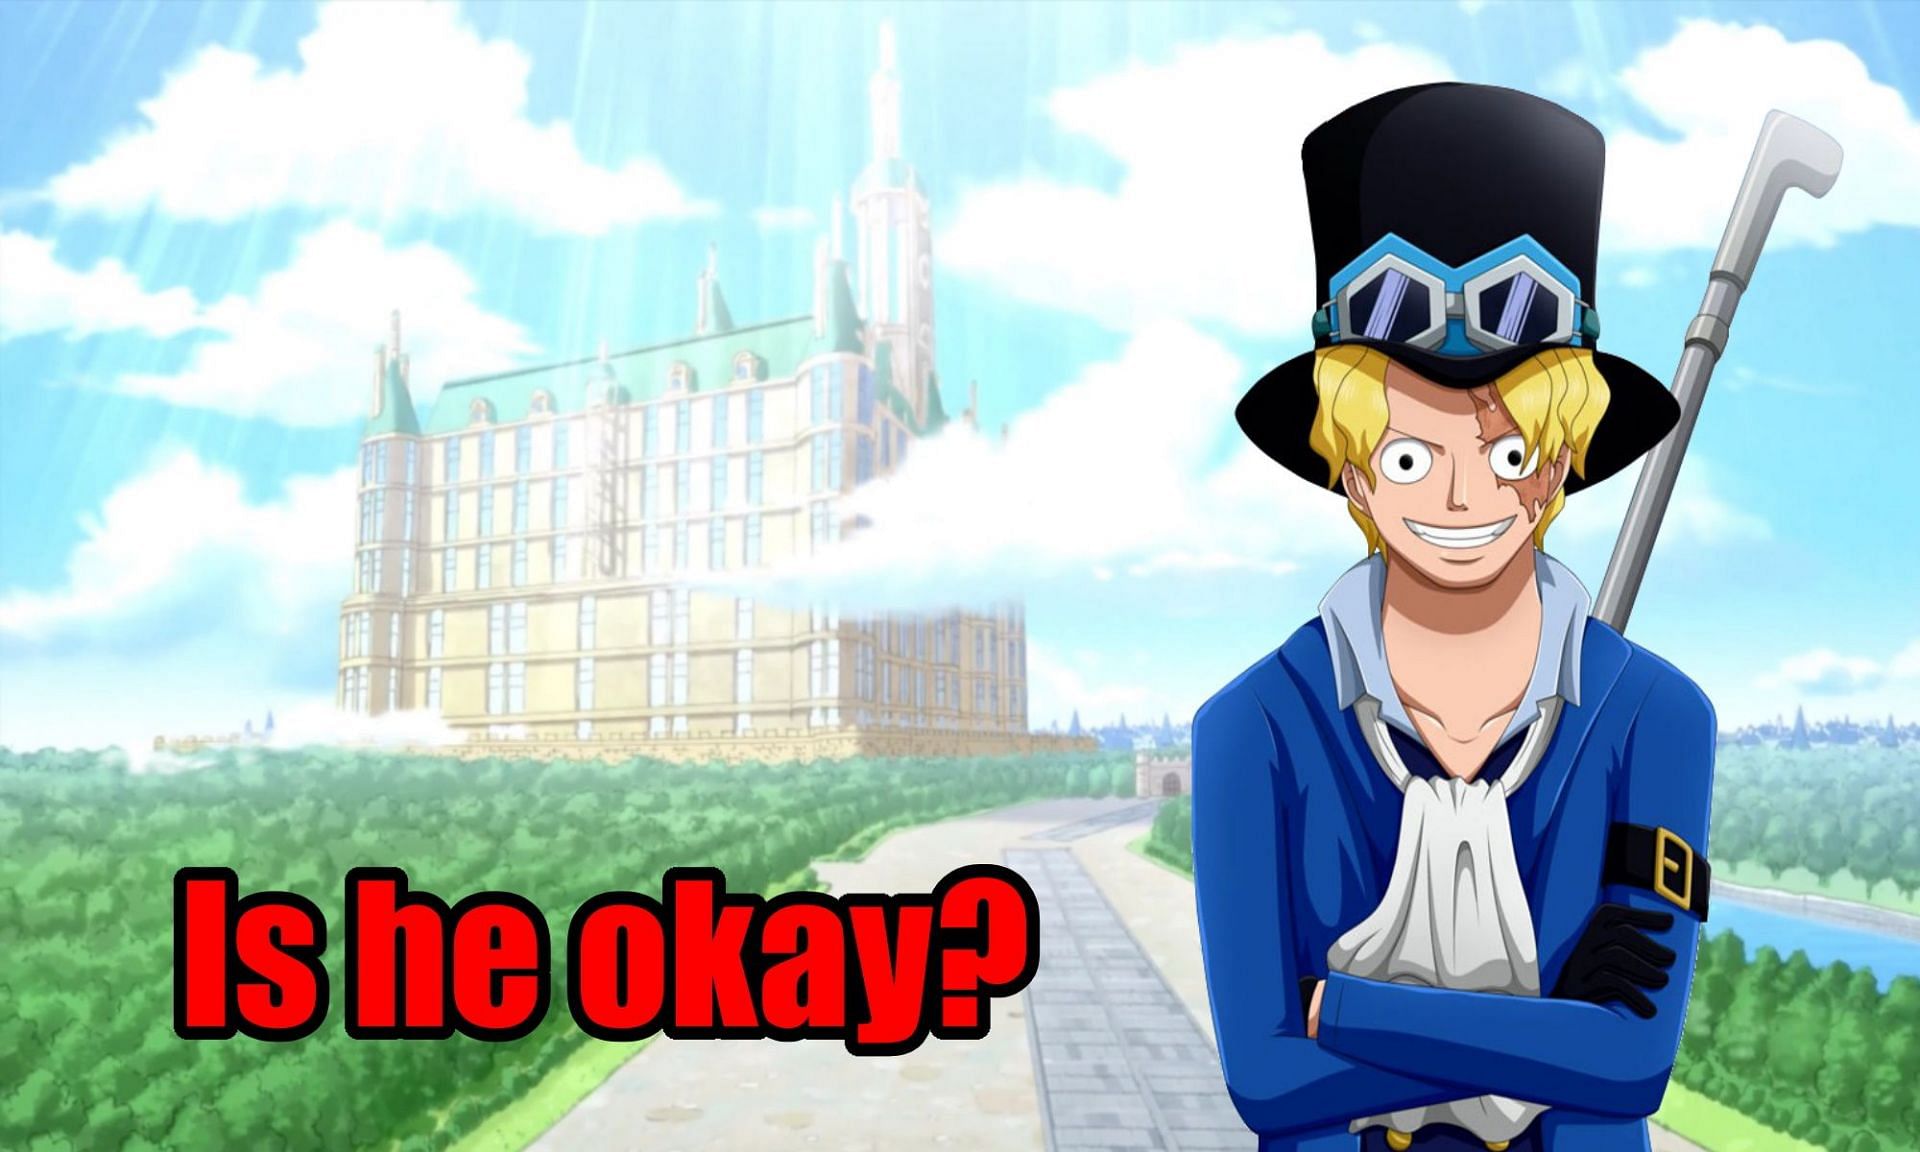 One Piece chapter 1037: Release date and time, where to read and more